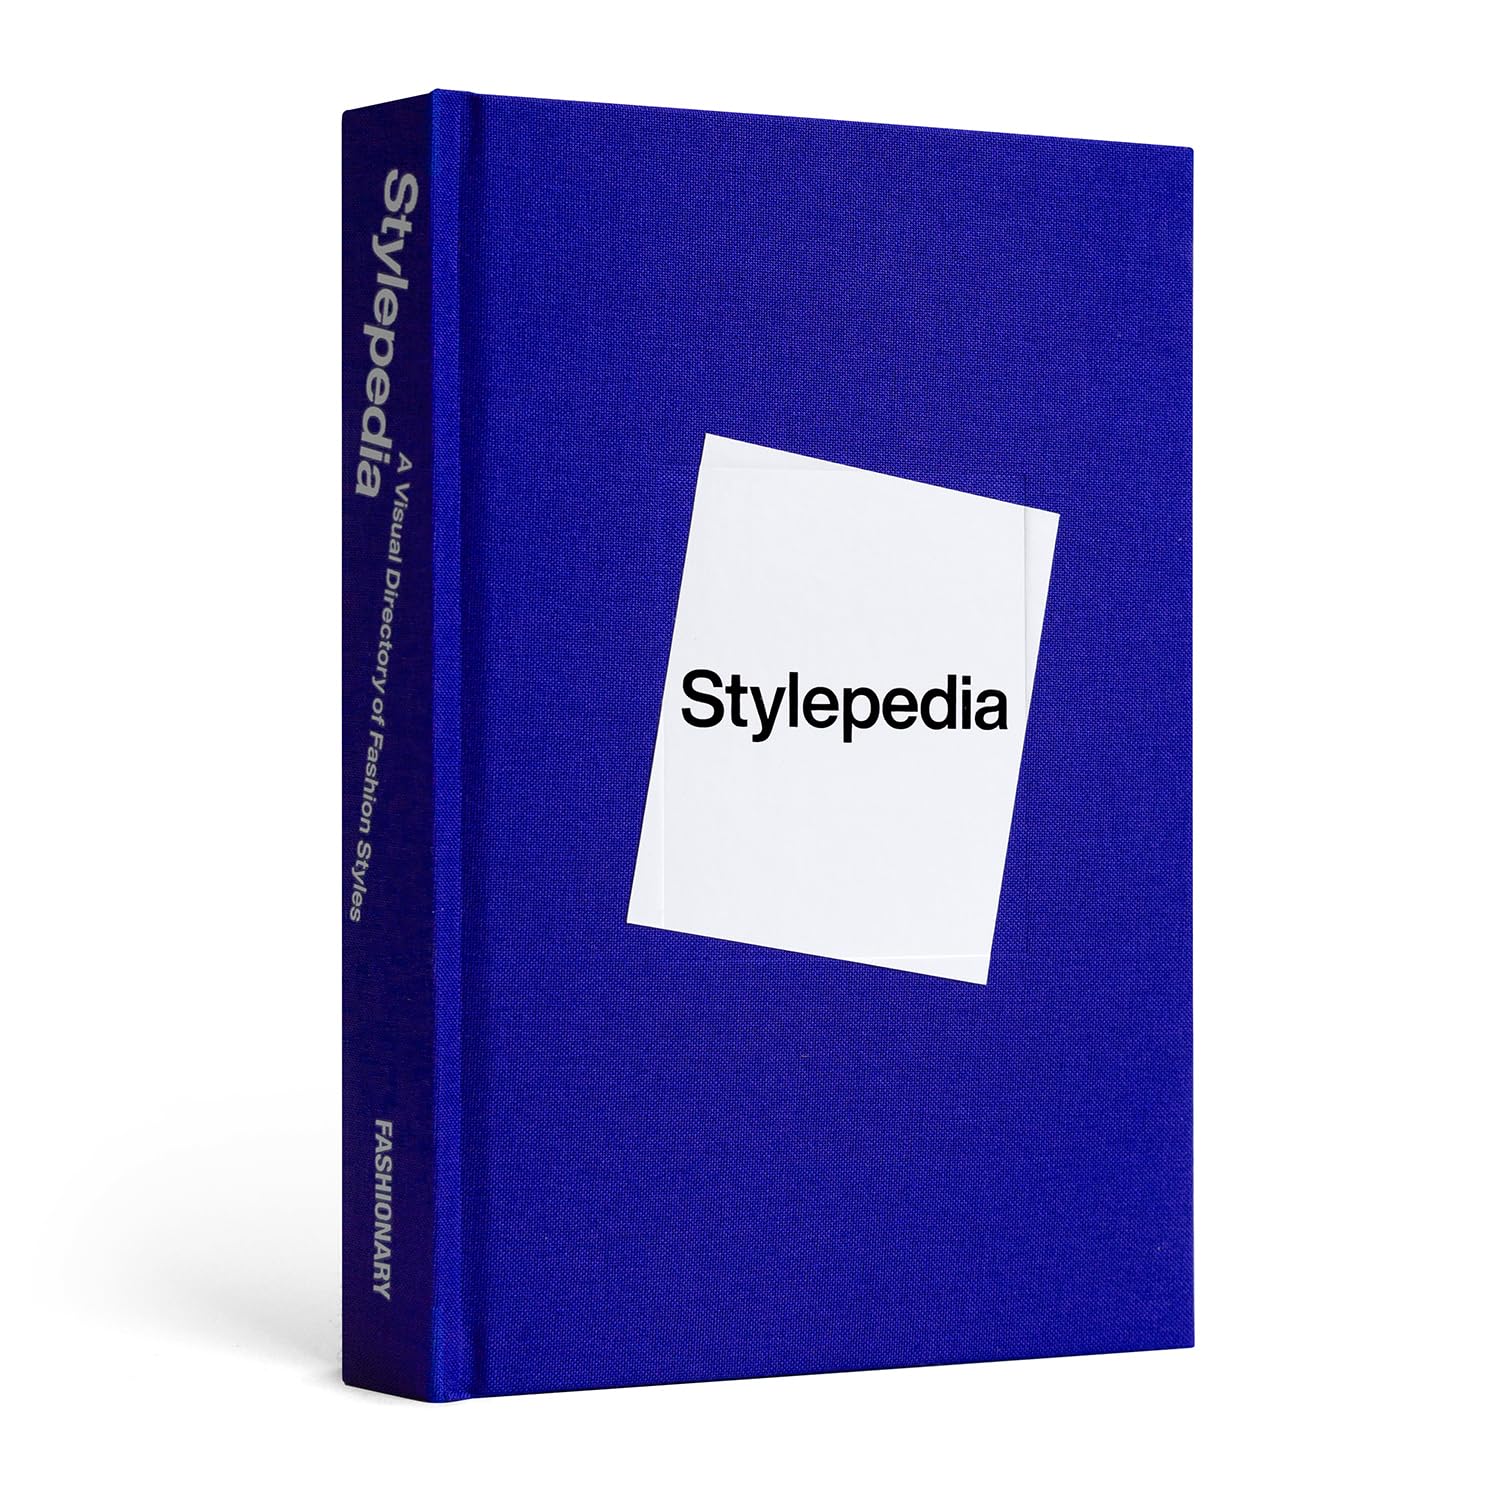 Stylepedia (Me & Asian Edition): A Visual Directory Of Fashion Styles